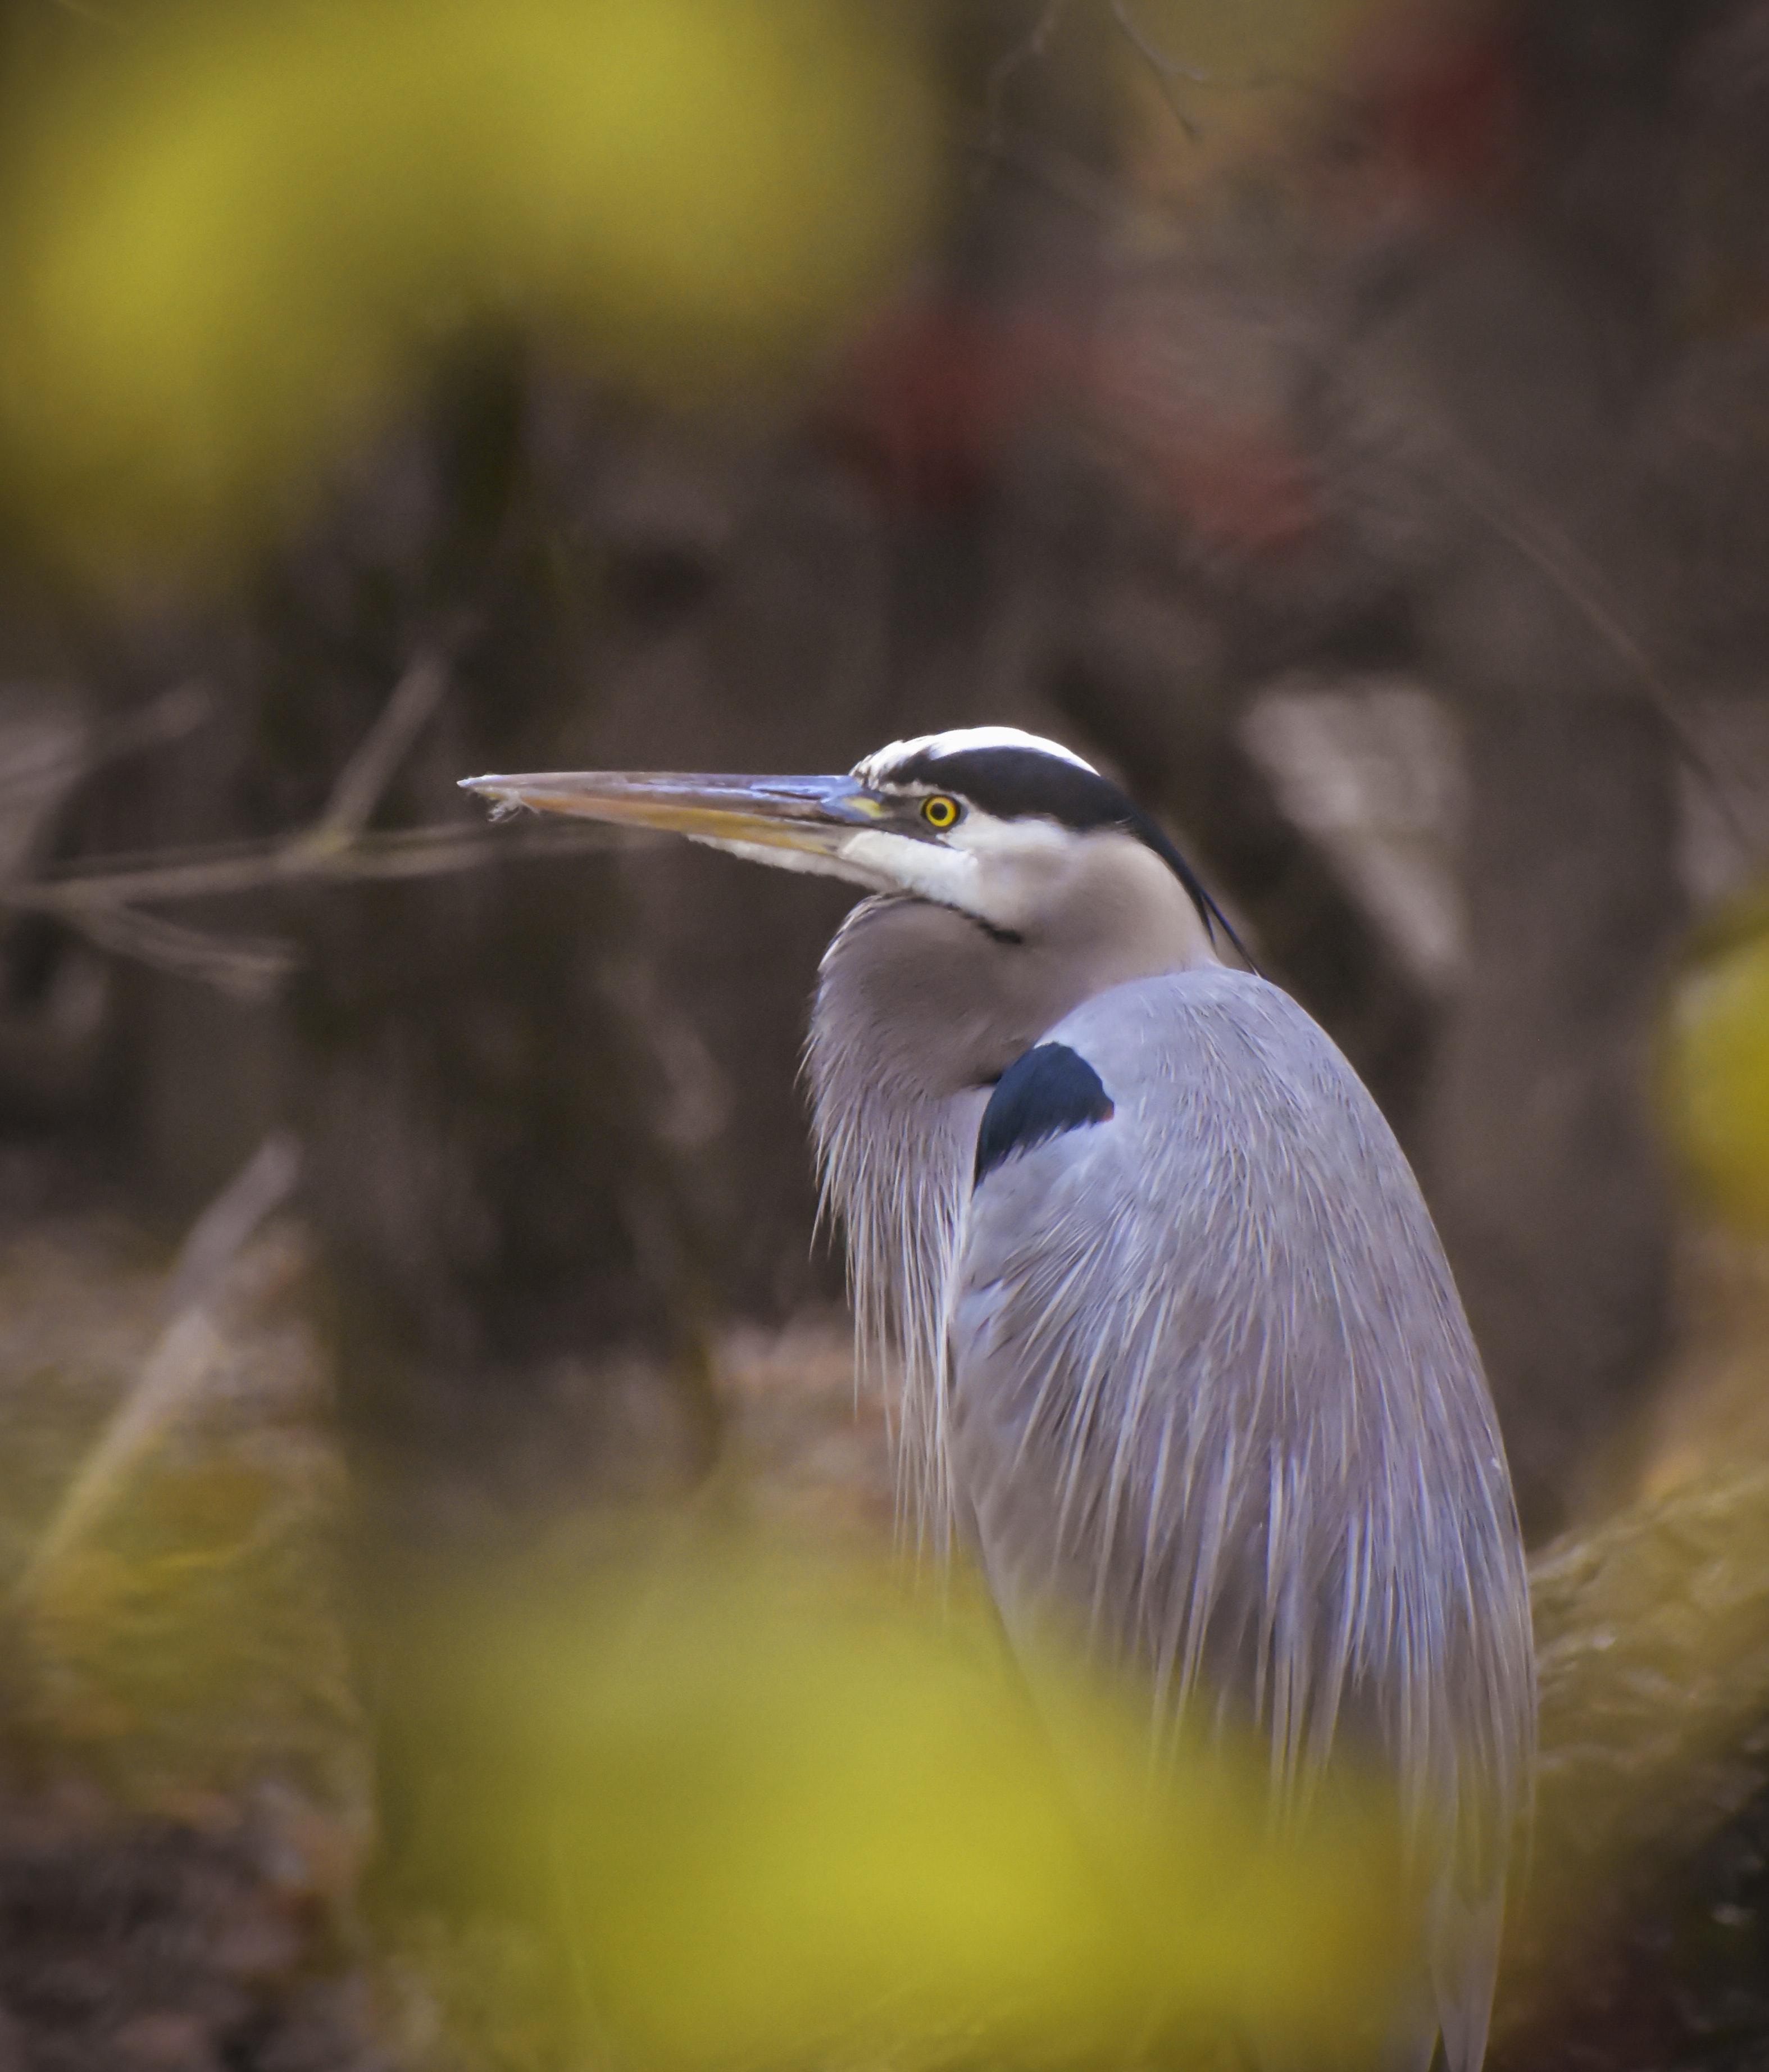 Is a heron a herbivore or carnivore? 